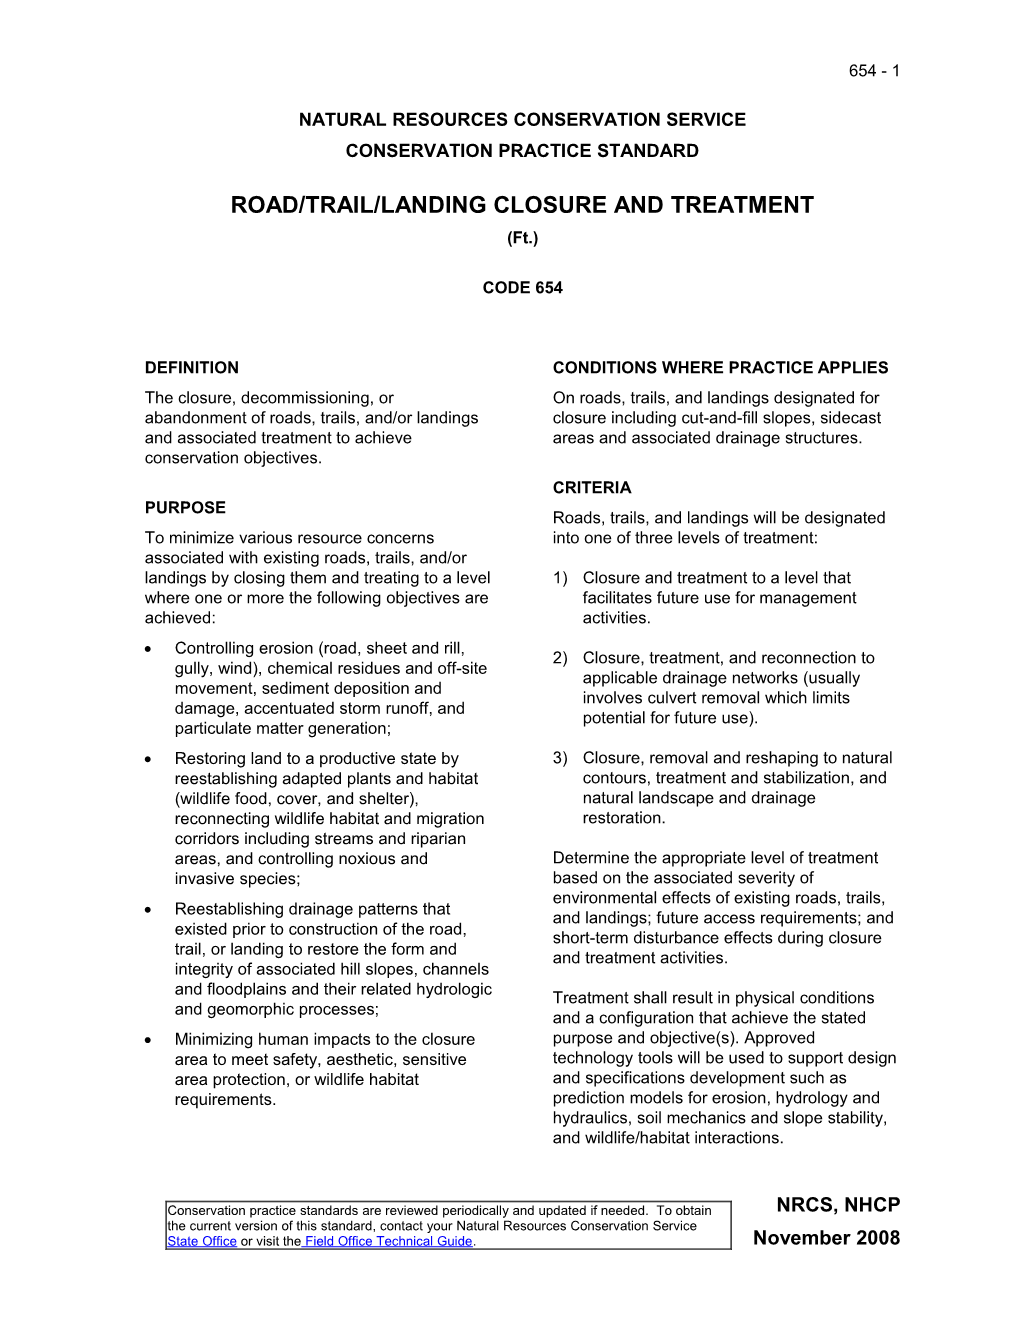 Road/Trail/Landing Closure and Treatment - Draft 722